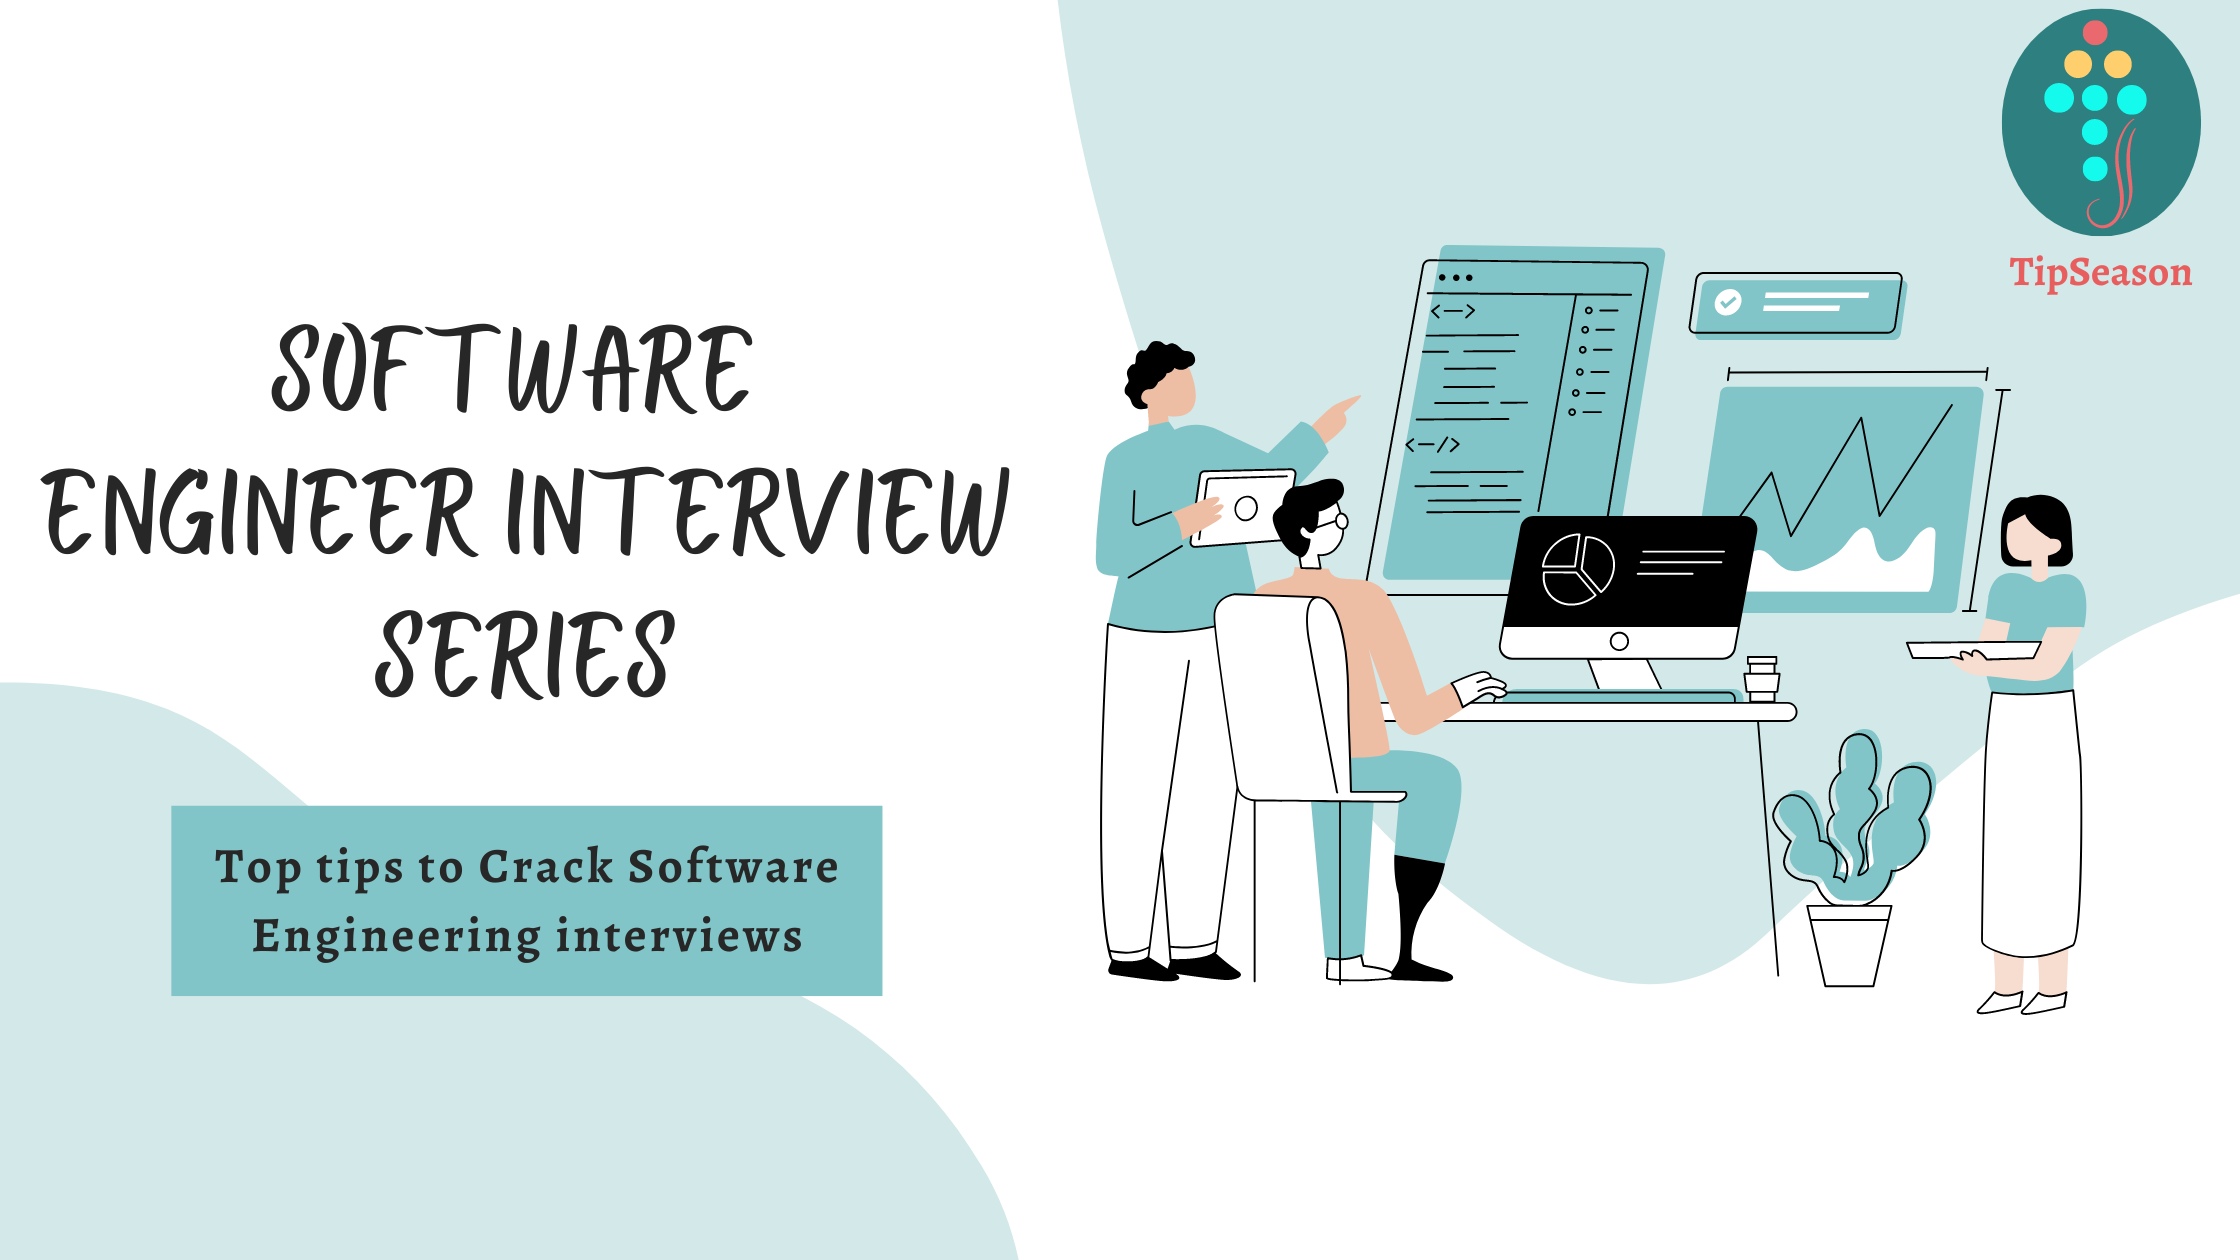 100+ Top Behavioral interview questions for Software Engineers